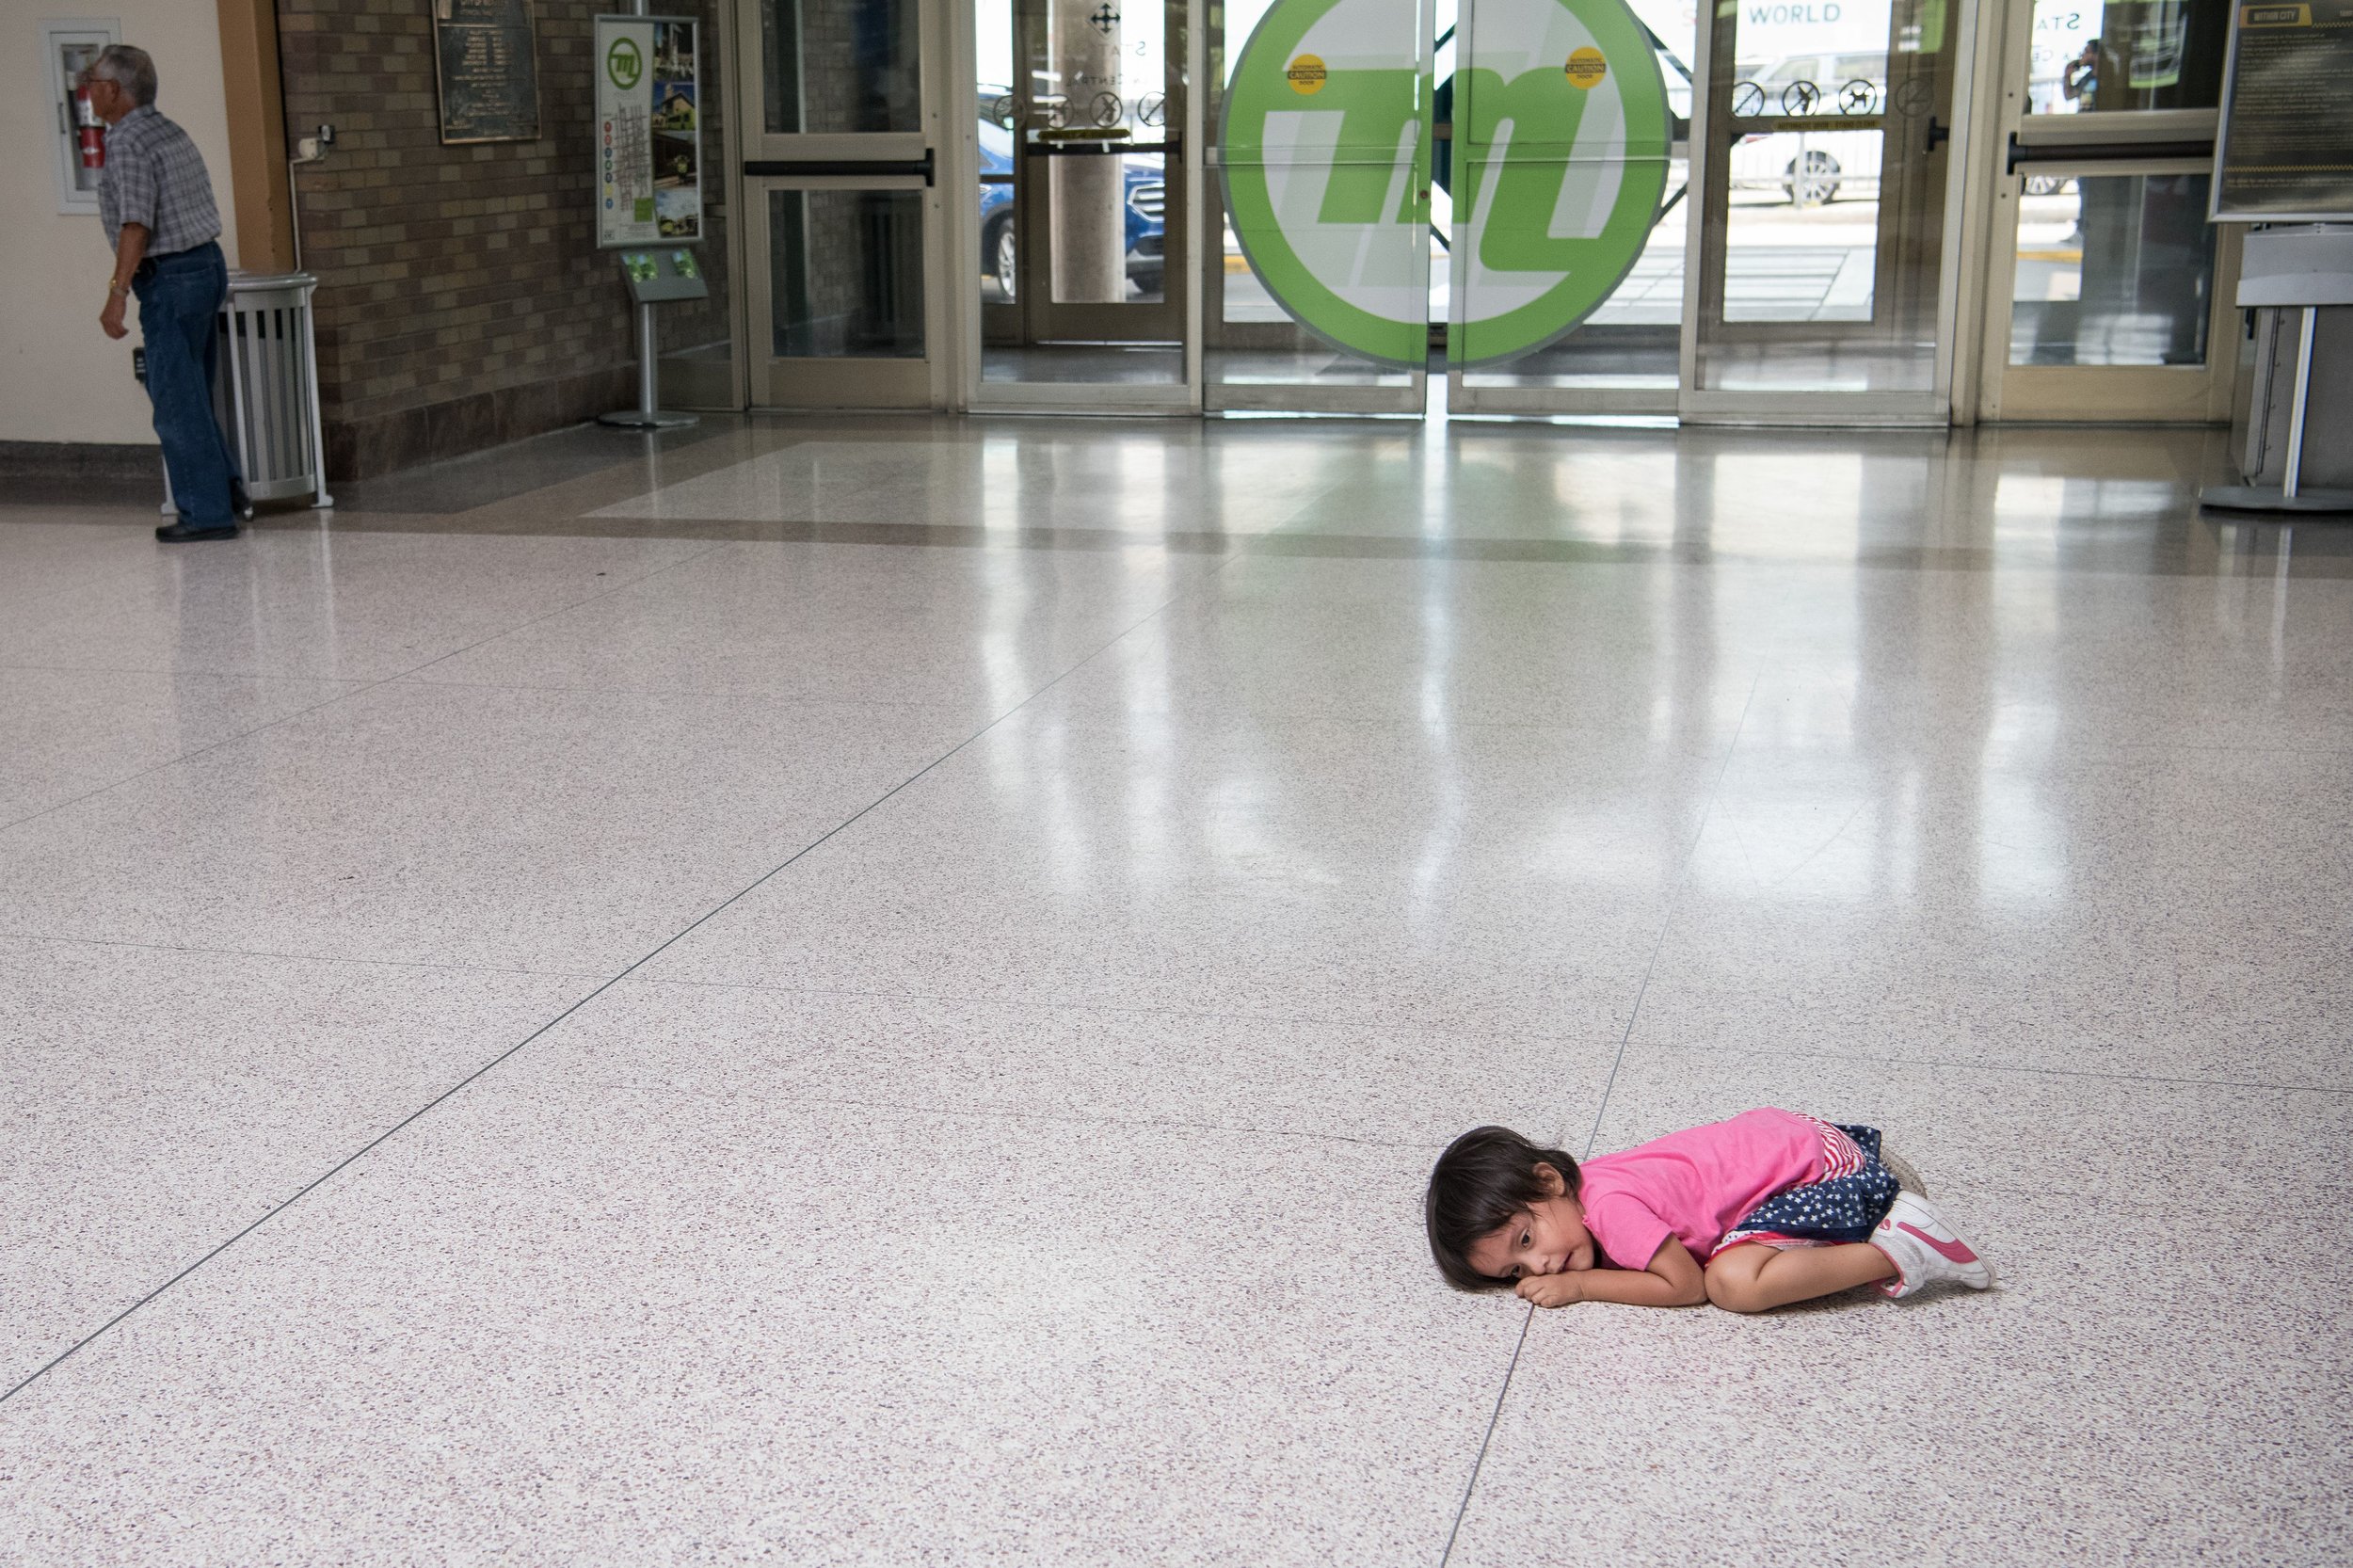  A young migrant girl sits on the floor as her father, recently released from federal detention with other Central American asylum seekers, gets a bus ticket at a bus depot on June 11, 2019, in McAllen, Texas. (Photo by LOREN ELLIOTT/AFP/Getty Images.) 